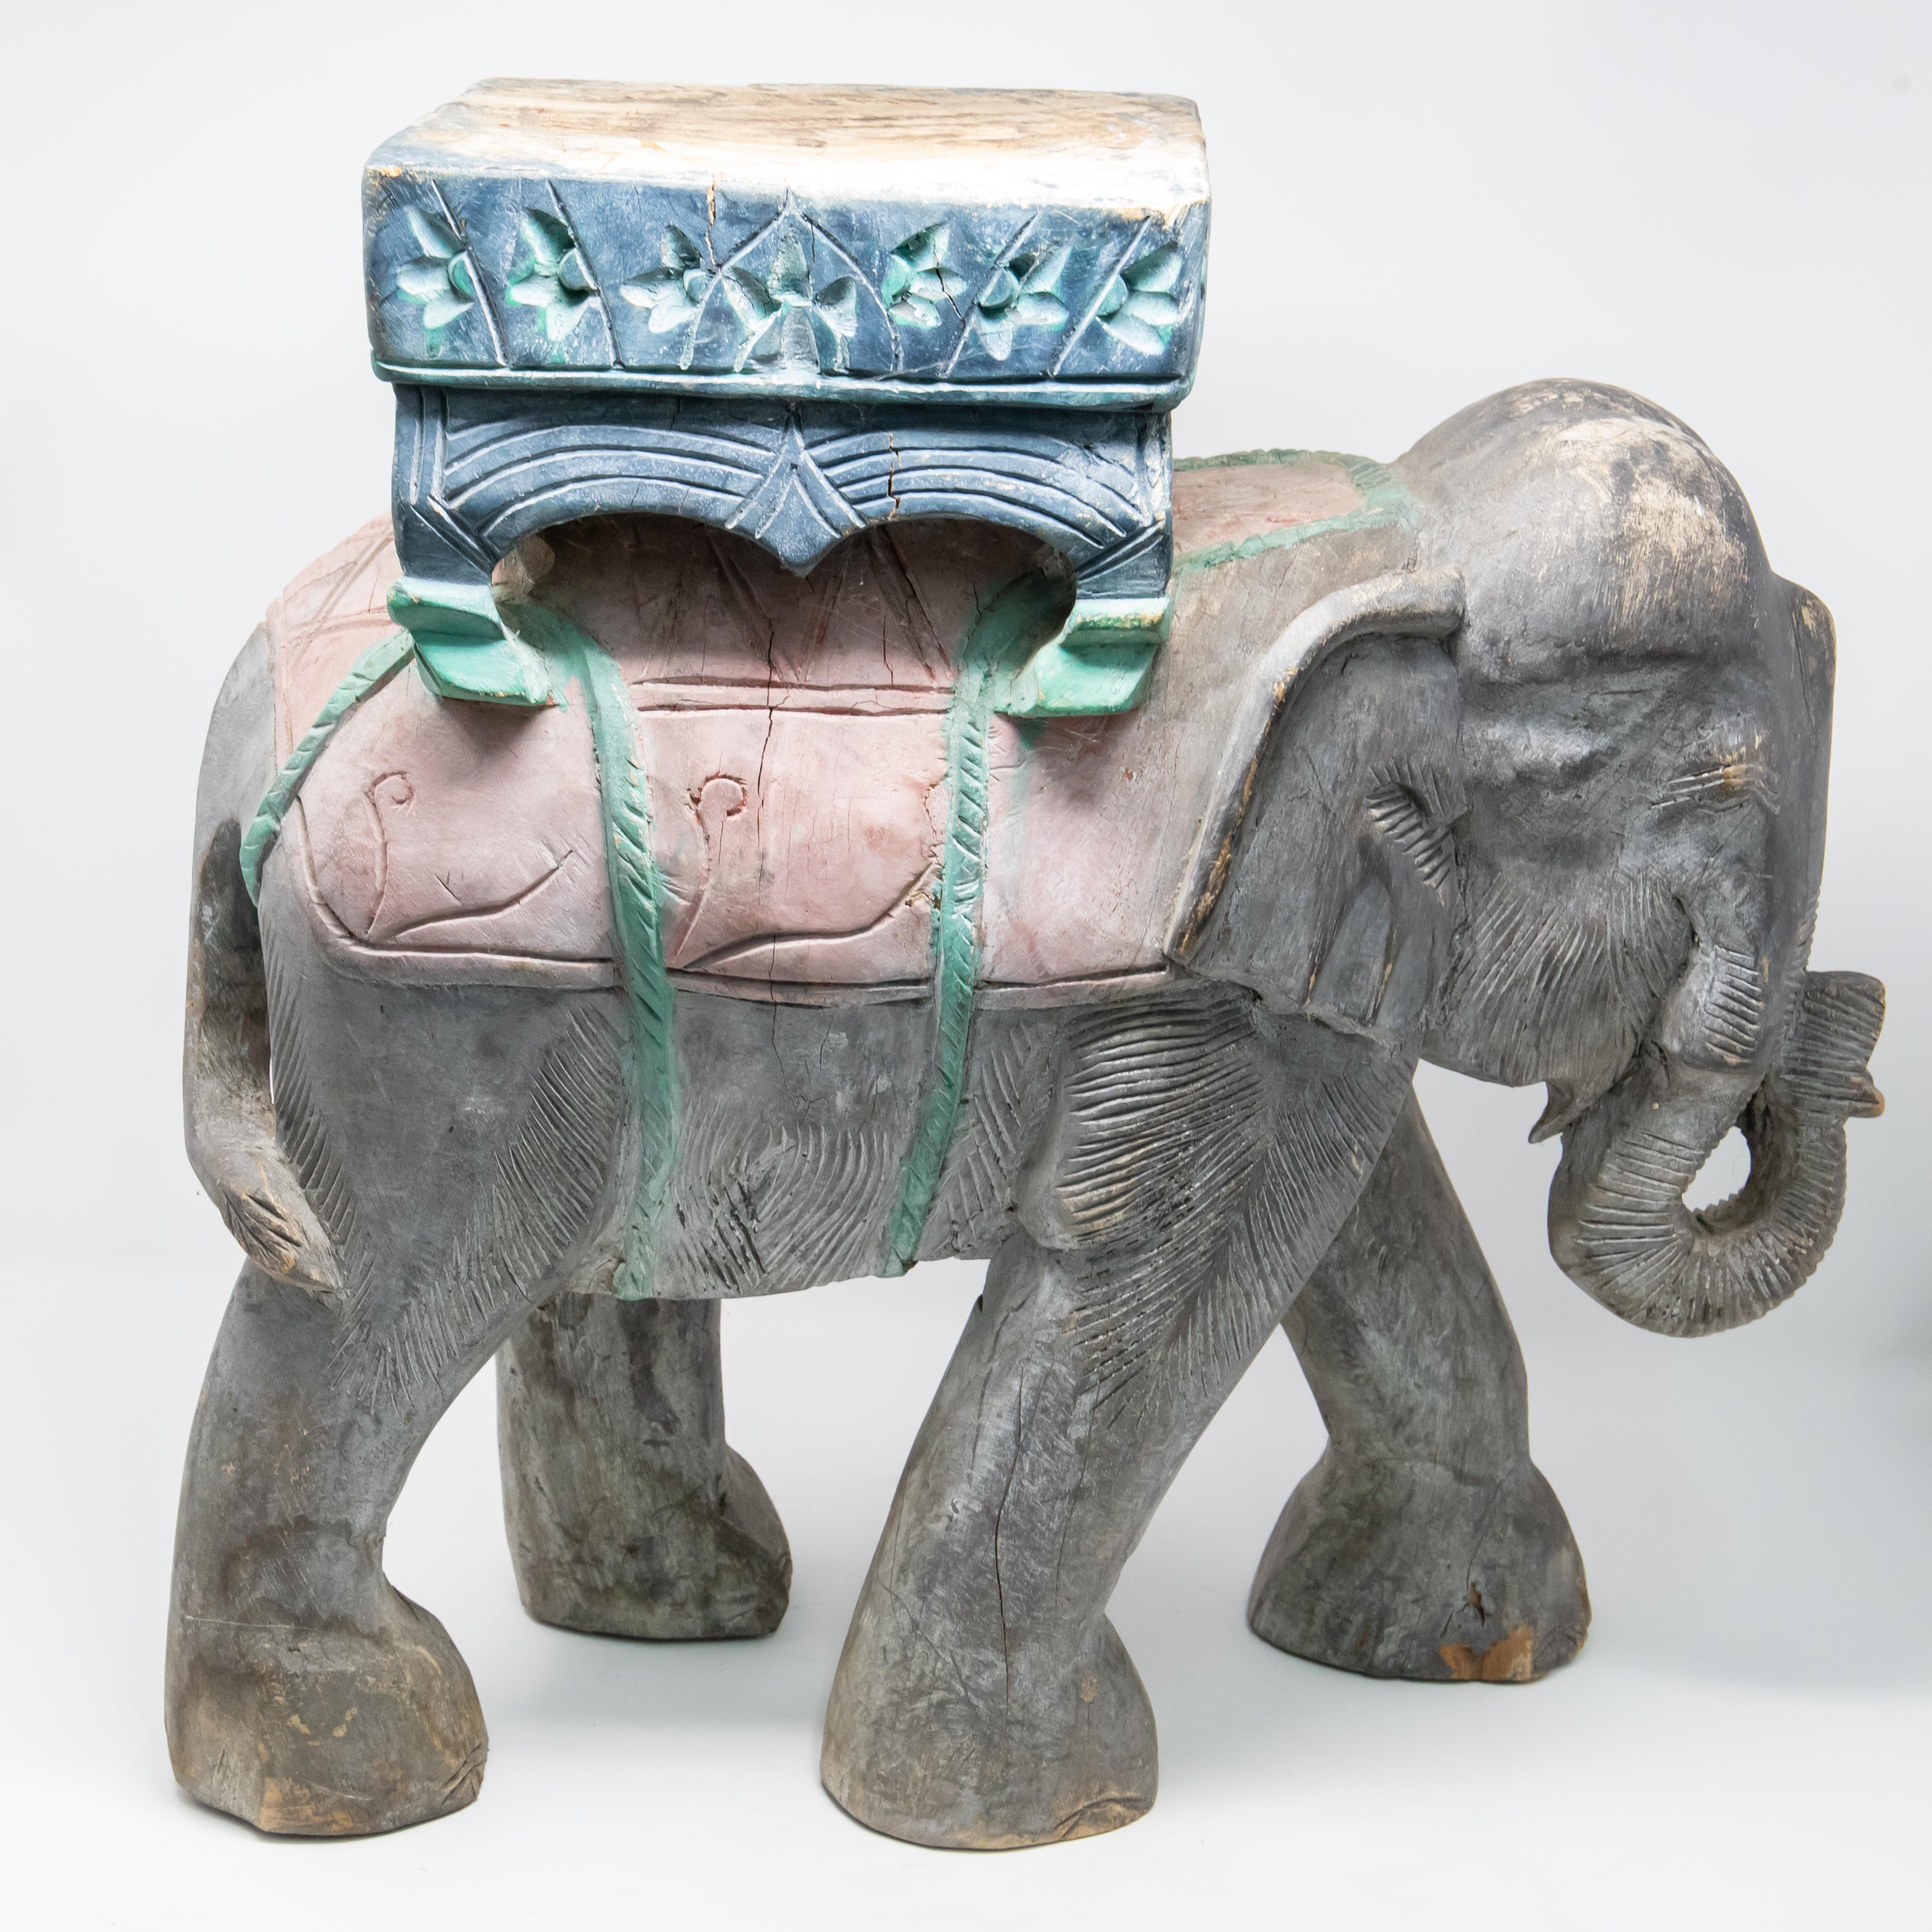 Offering a beautiful elephant plant stand. Hand carved and hand painted the detail is amazing. Elephant is mid stride with his trunk bowed up. Stands strong for a beautiful urn or planter to sit atop this piece.